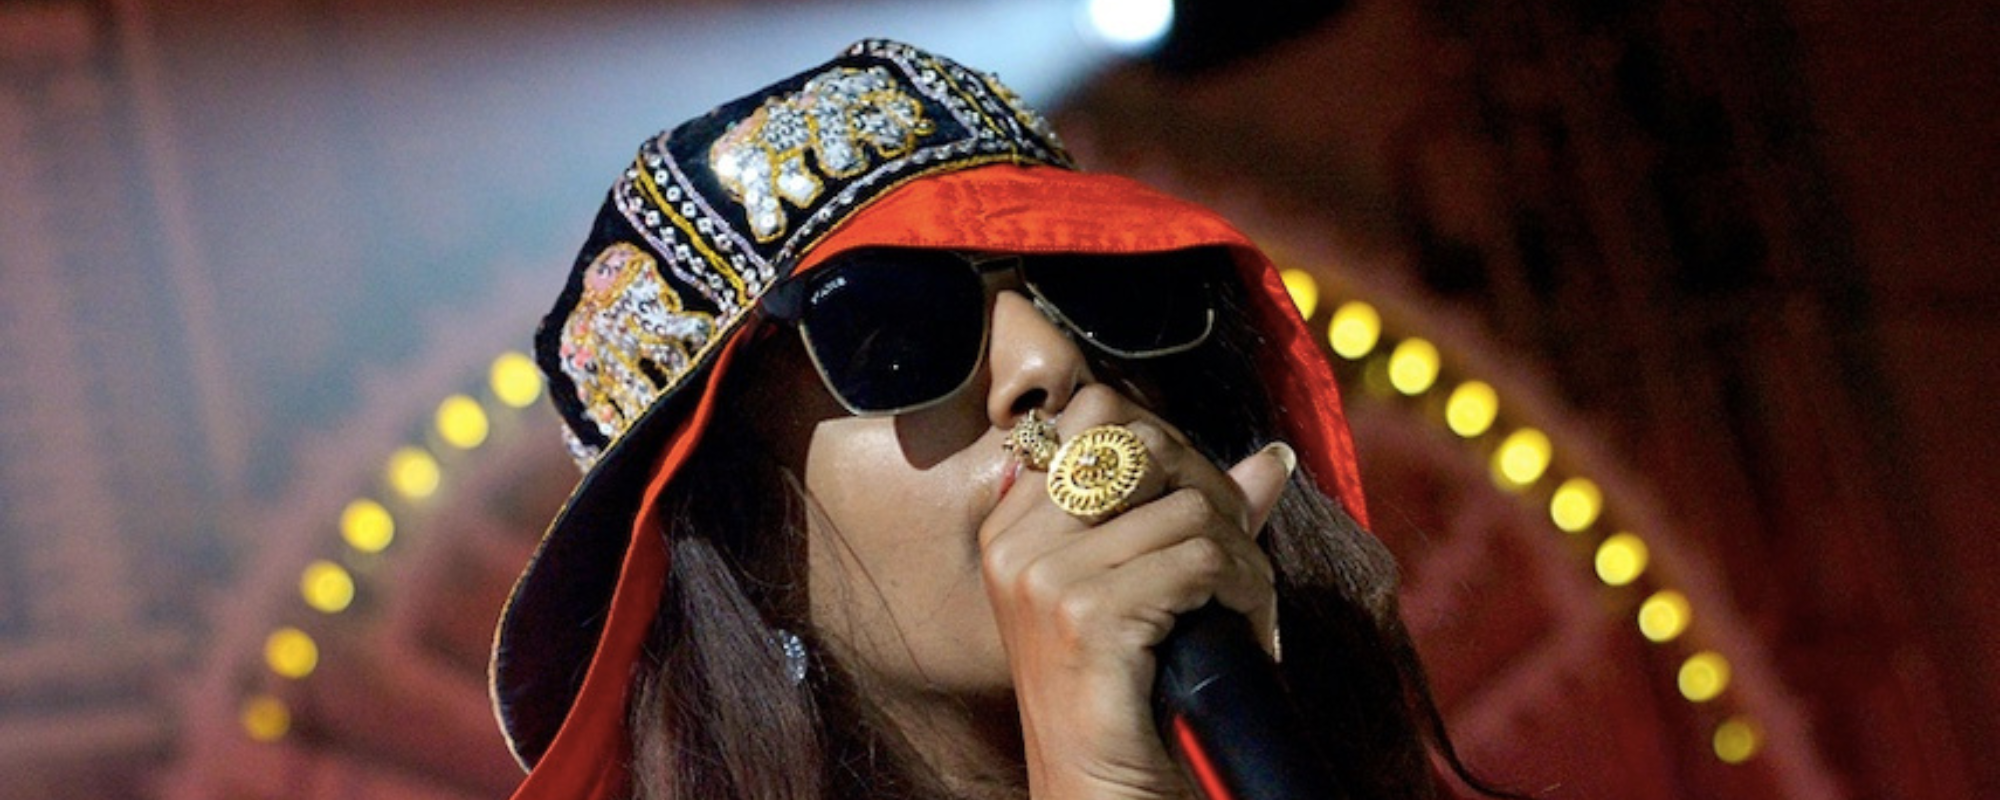 The Meaning Behind M.I.A.’s Punk-Rock Influenced Hit “Paper Planes”